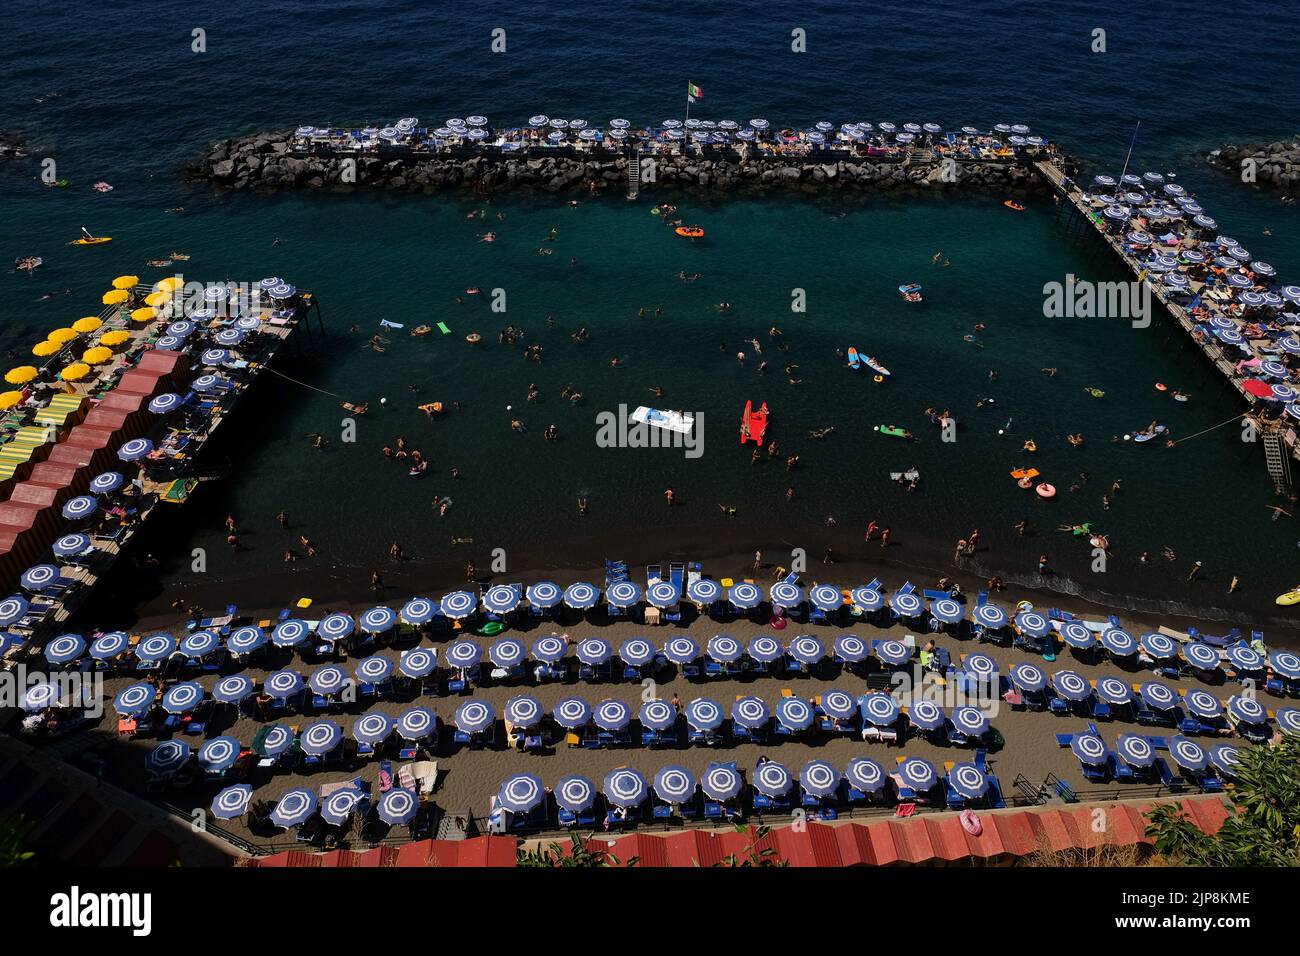 An aerial view on to the beach clubs at Sorrento southern Italy providing tourist and locals a safe swimming and bathing area. Stock Photo